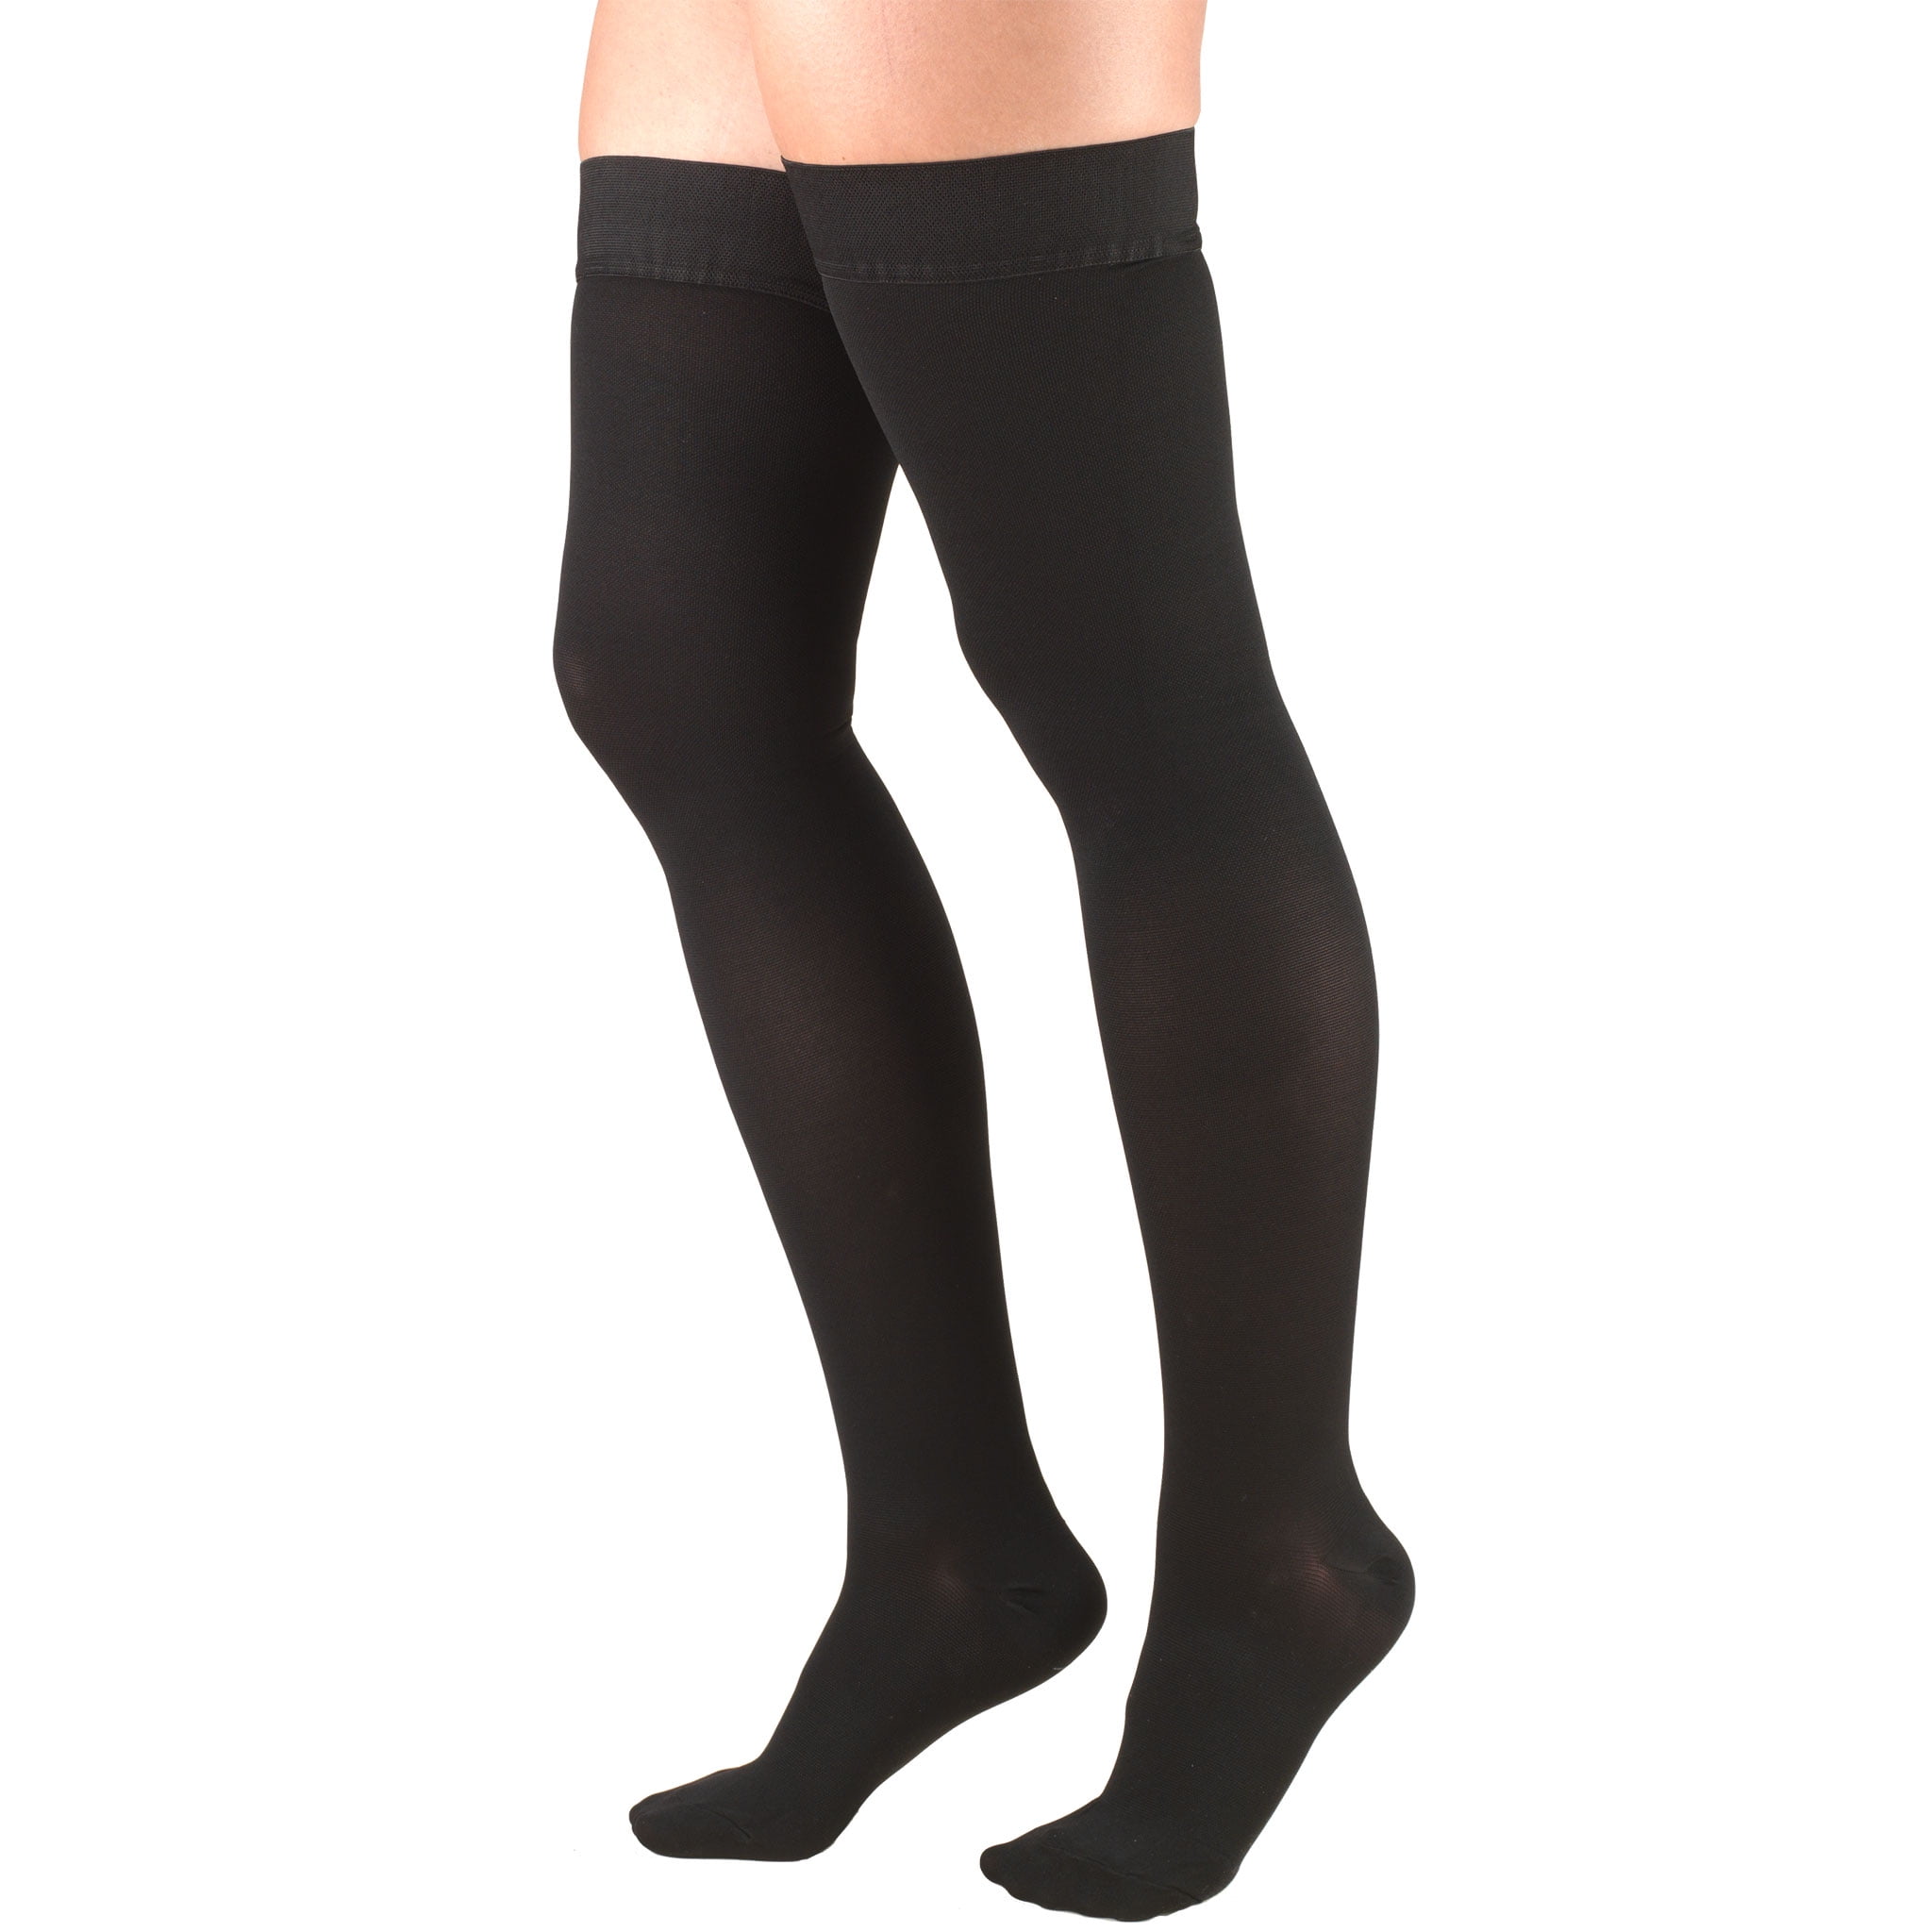  Truform 30-40 mmHg Compression Stockings For Men And Women,  Thigh High Length, Dot-Top, Closed Toe, Black, X-Large